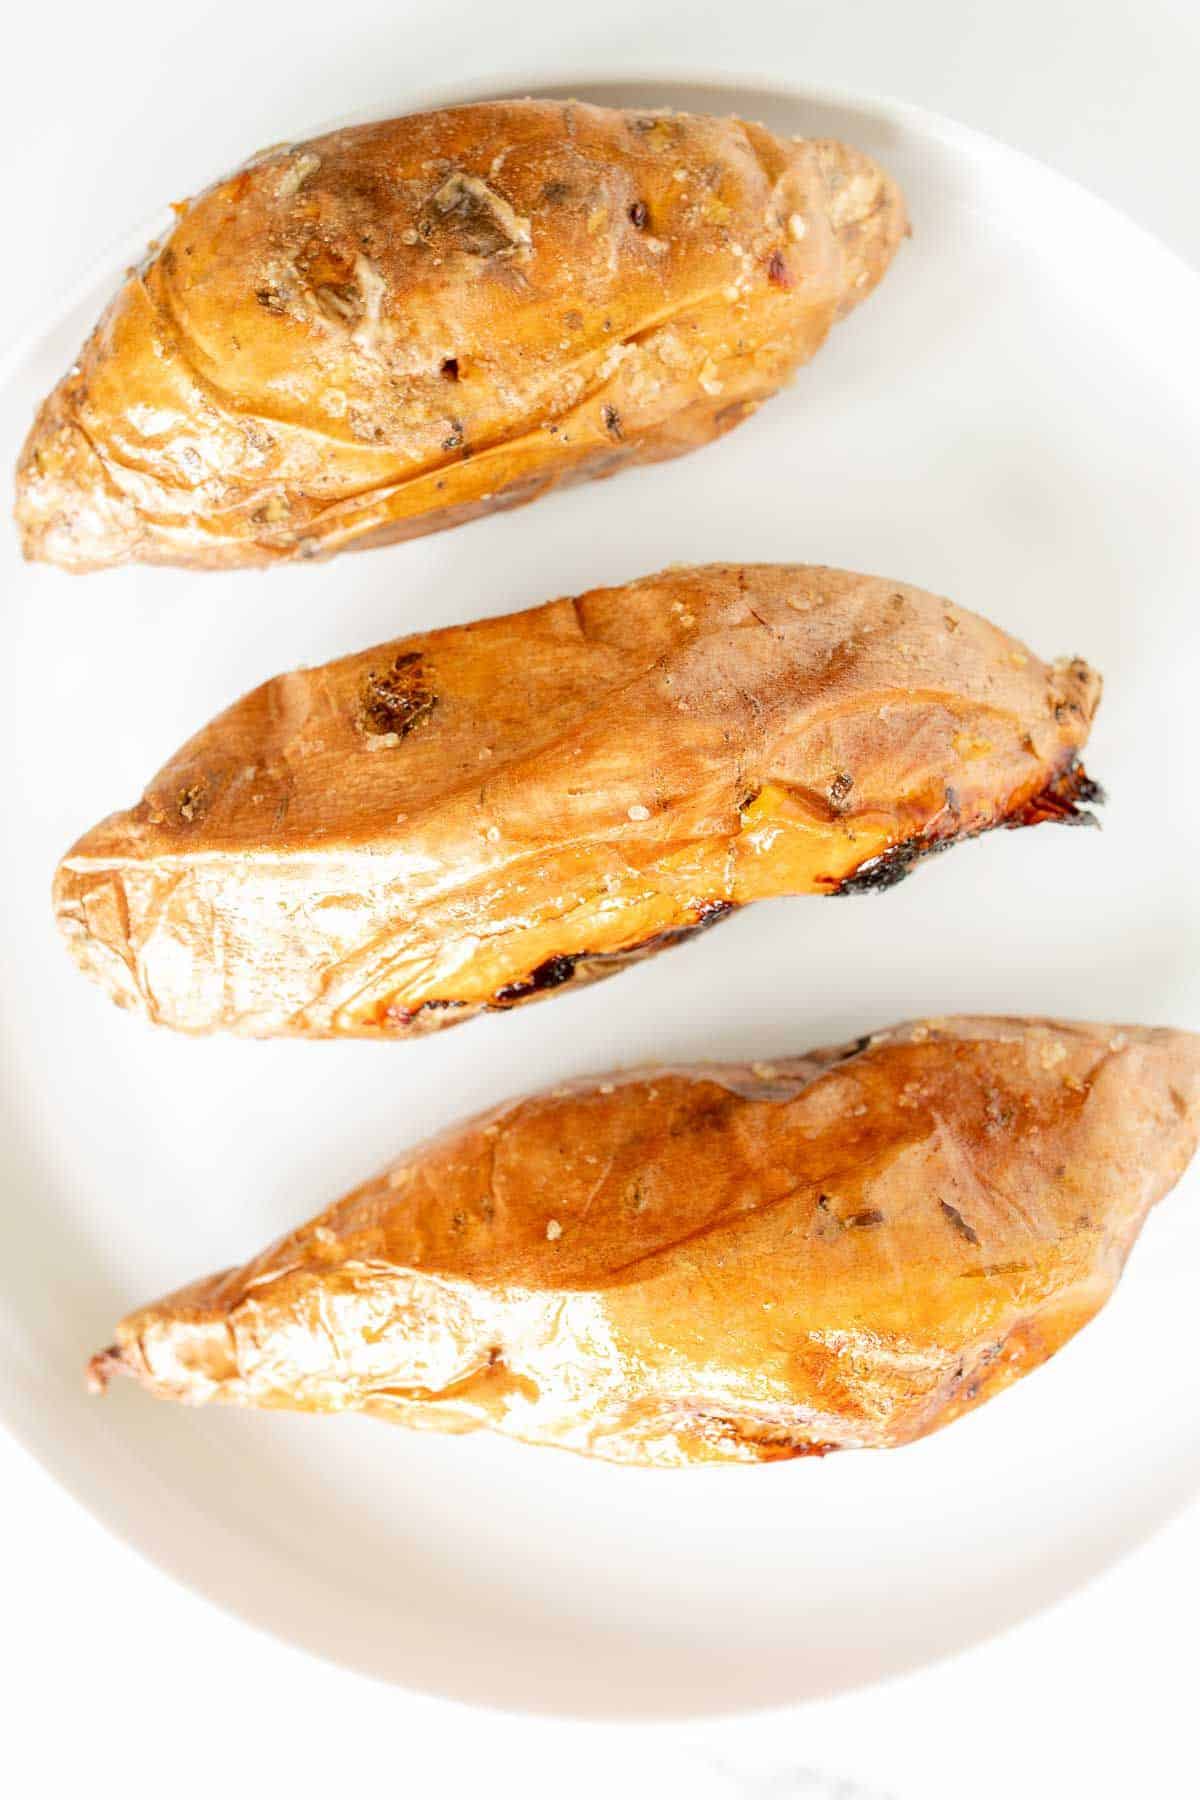 Grilled sweet potatoes on a white plate.